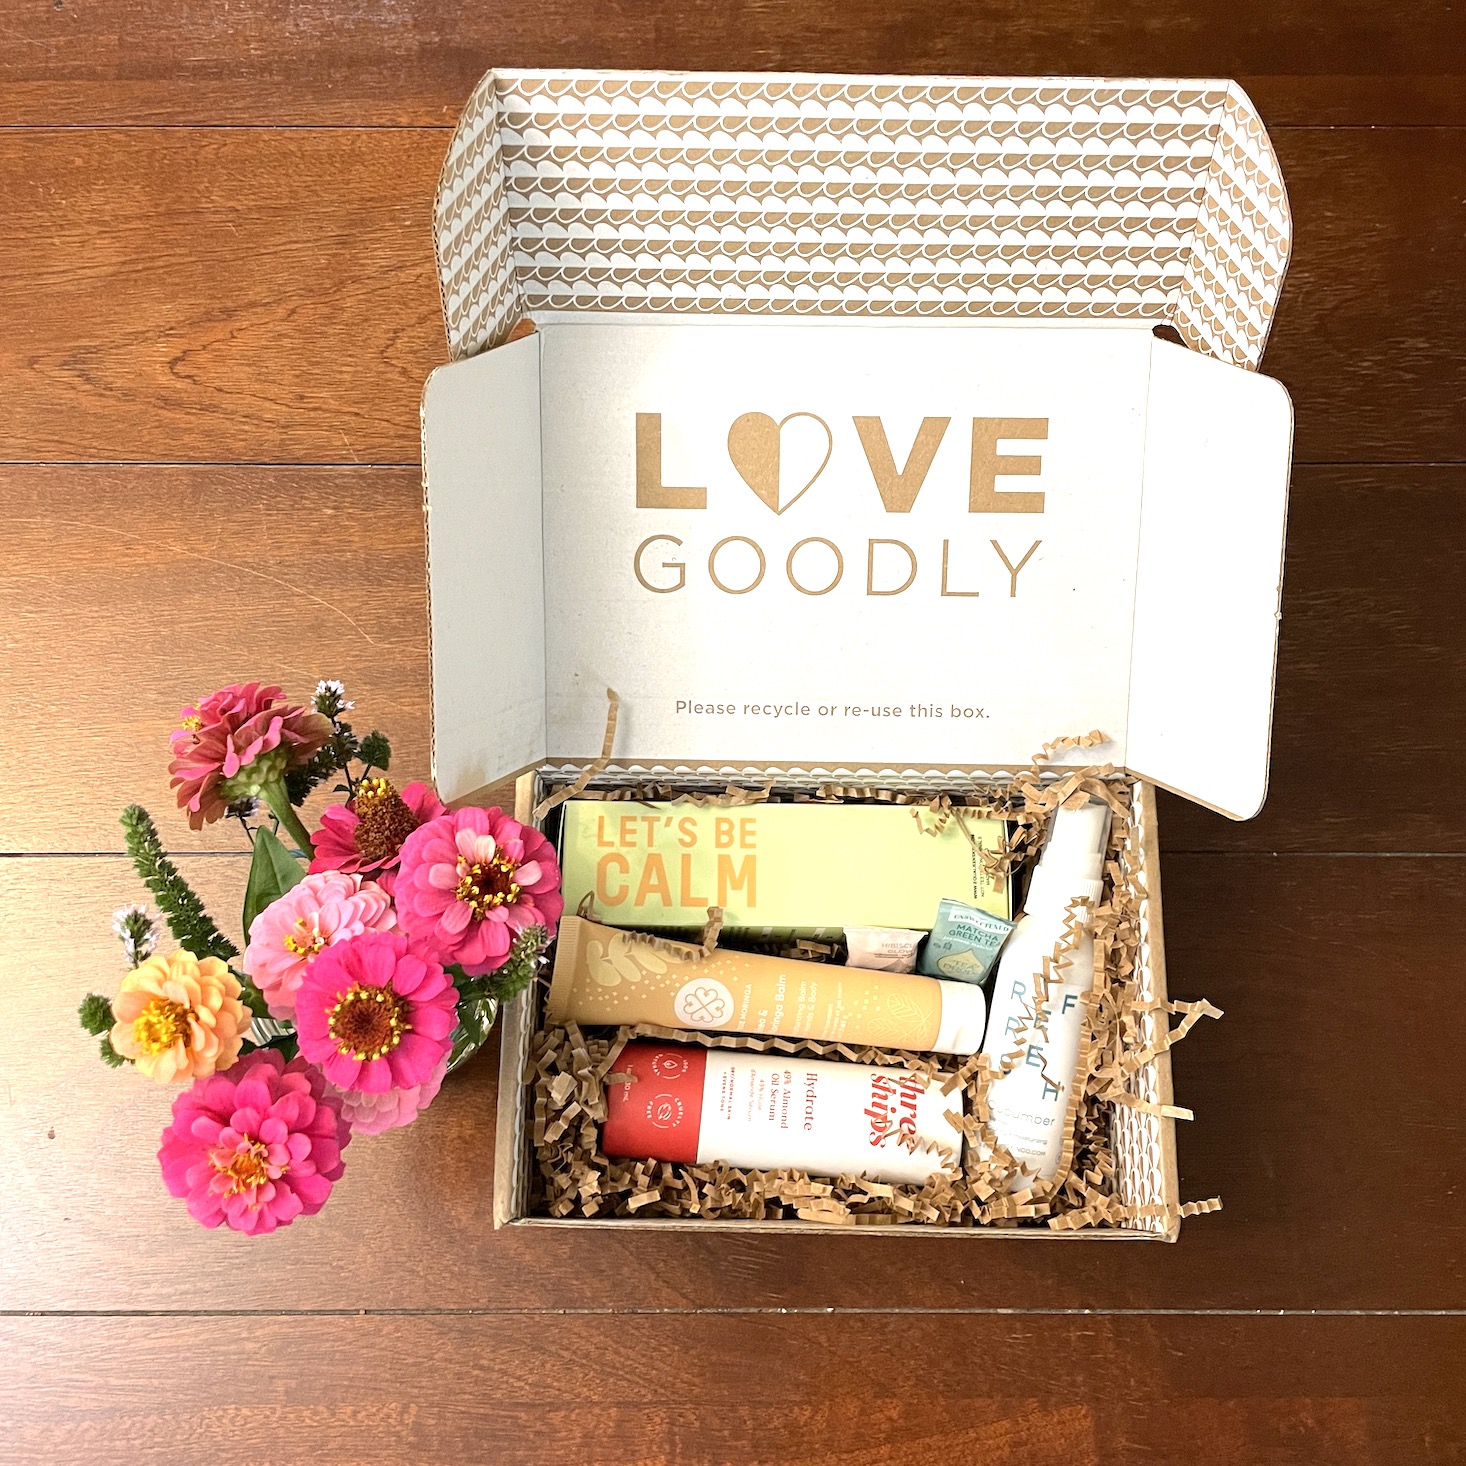 Love Goodly August/September 2022 open box showing all products